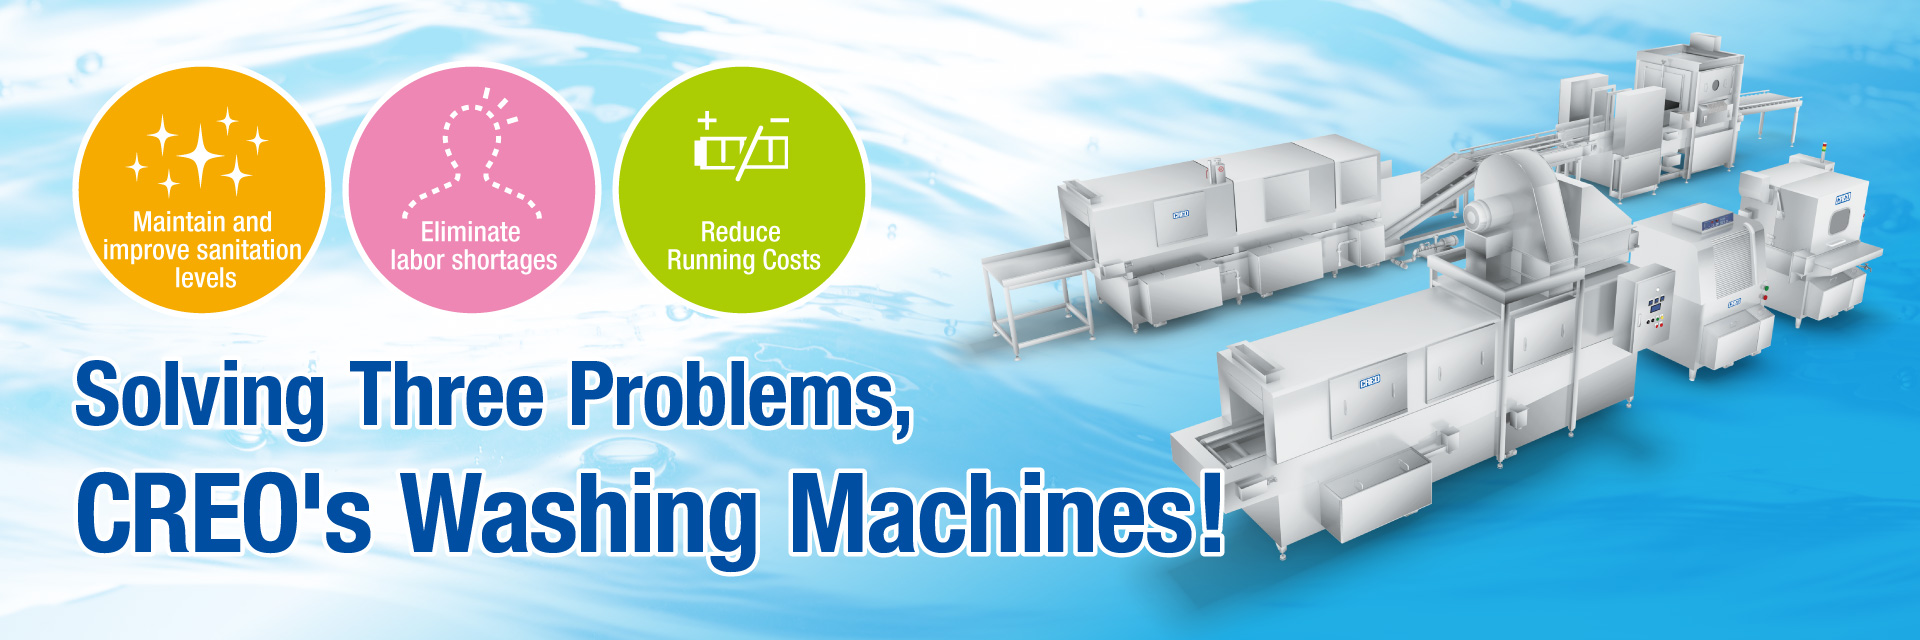 Maintain and improve sanitation levels/Eliminate labor shortages/Reduce running costs 3 problems solved by a single machine! The CREO Washing Machine